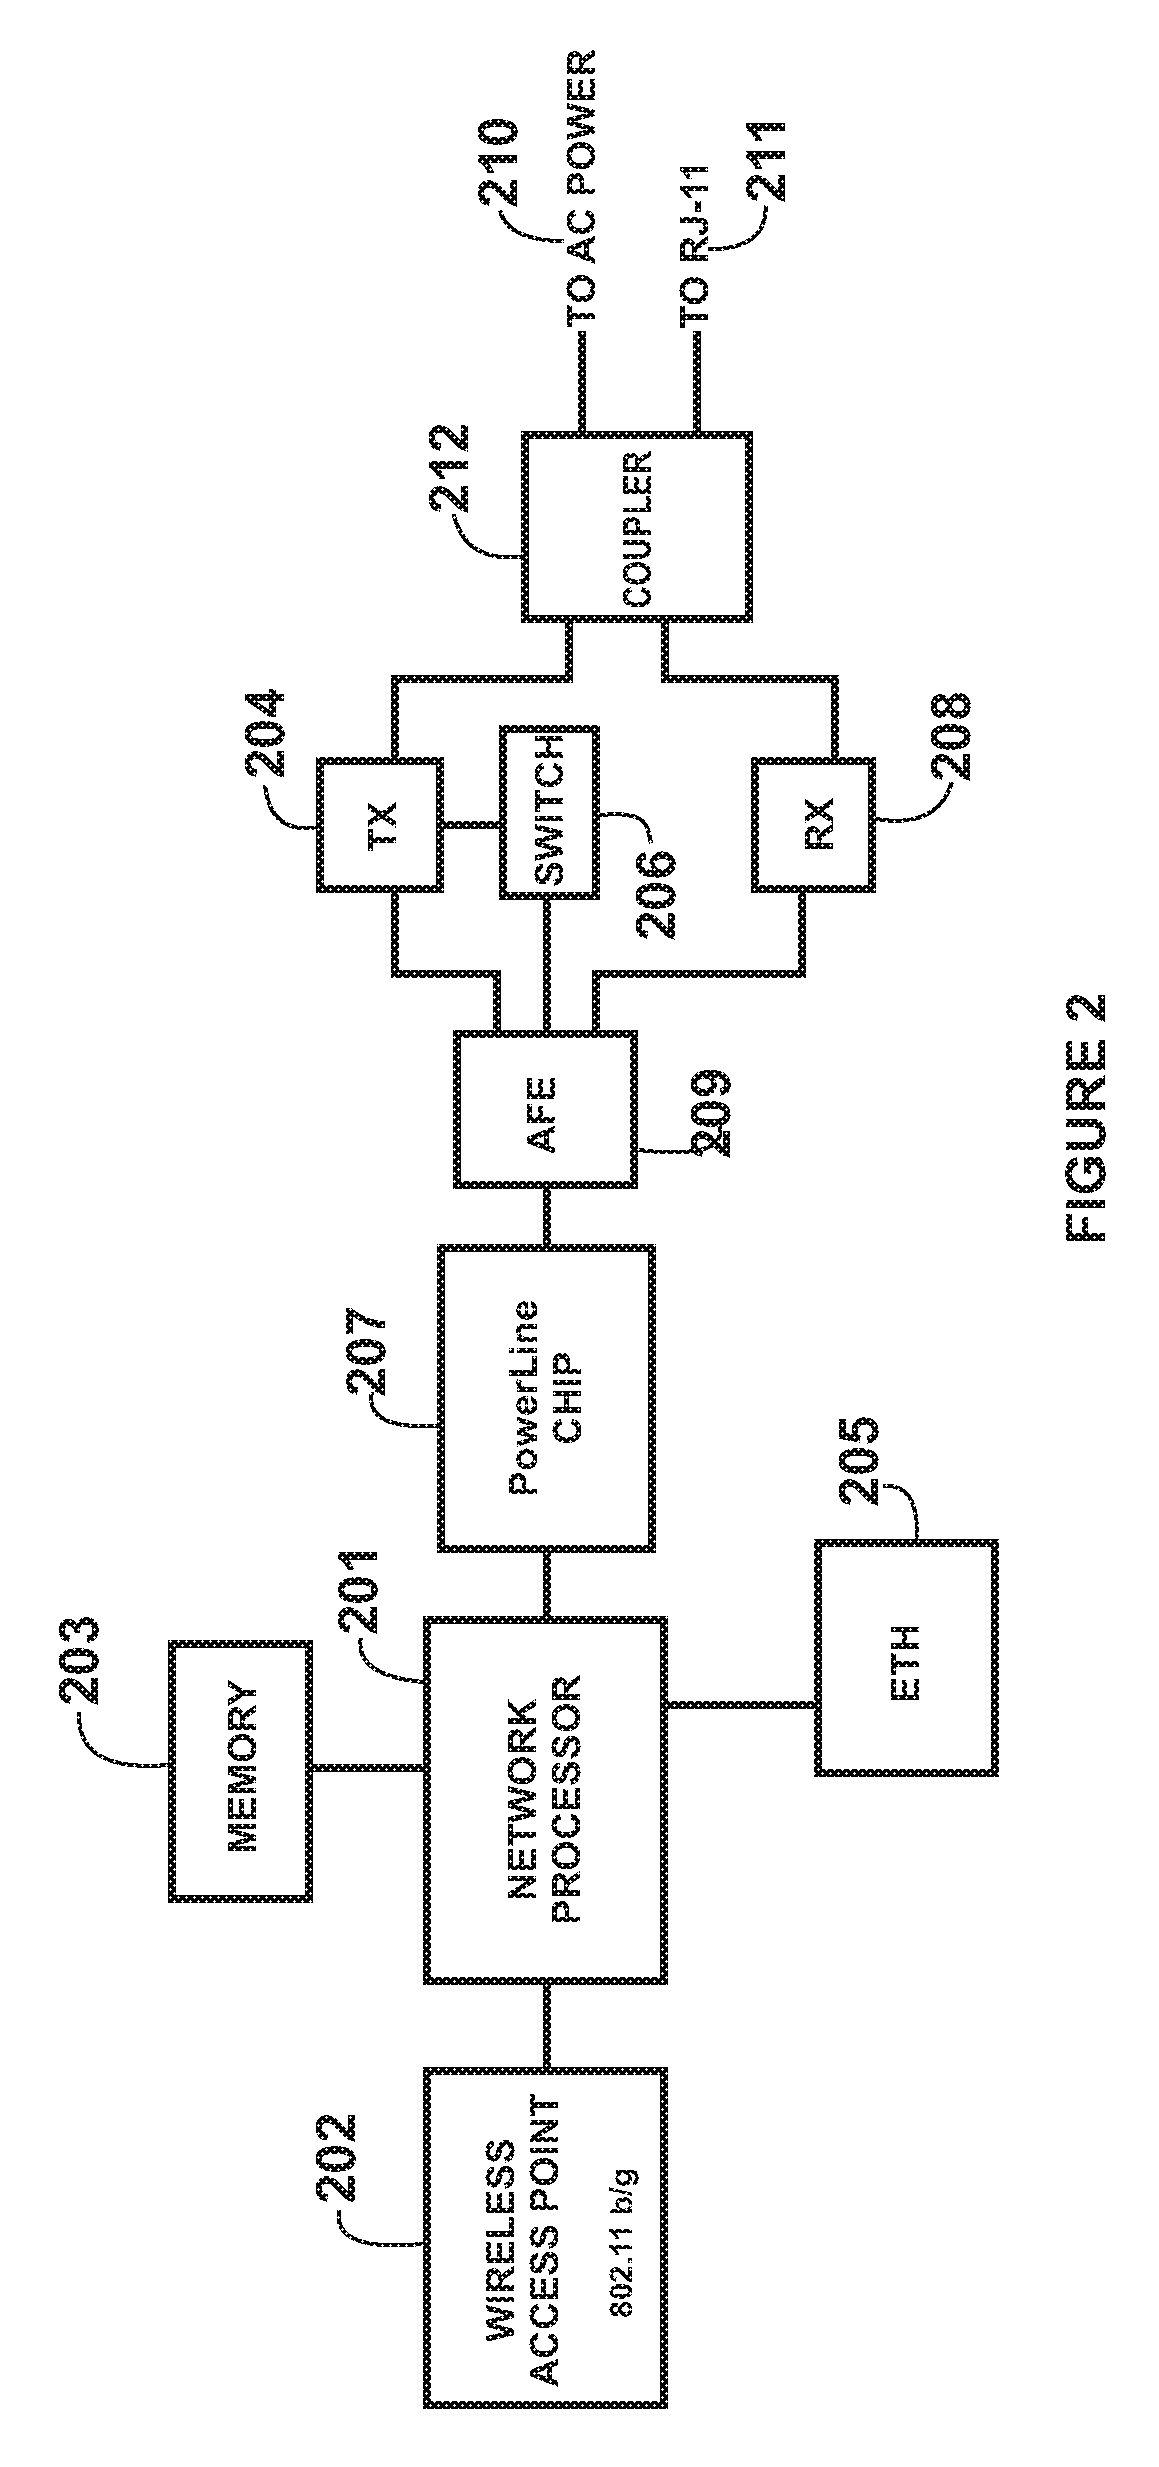 System and Method for Repeater in a Power Line Network